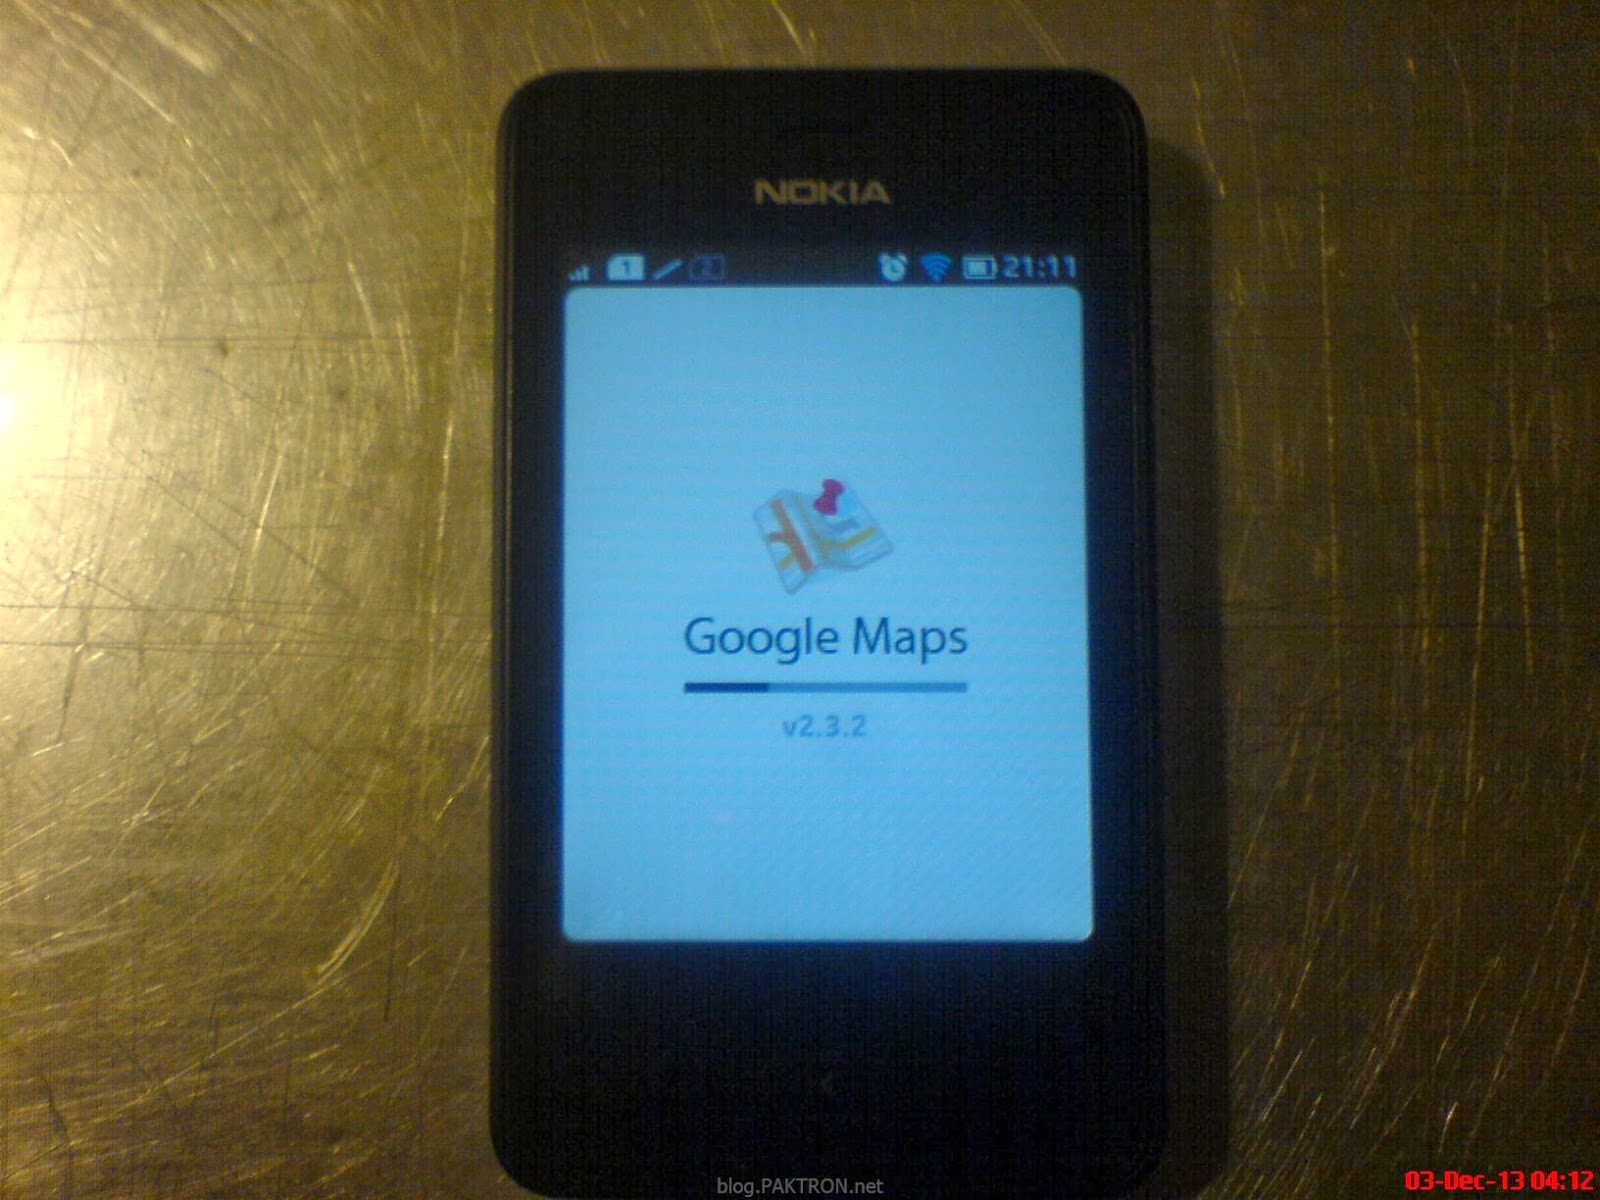 Free download google map for nokia mobile phone